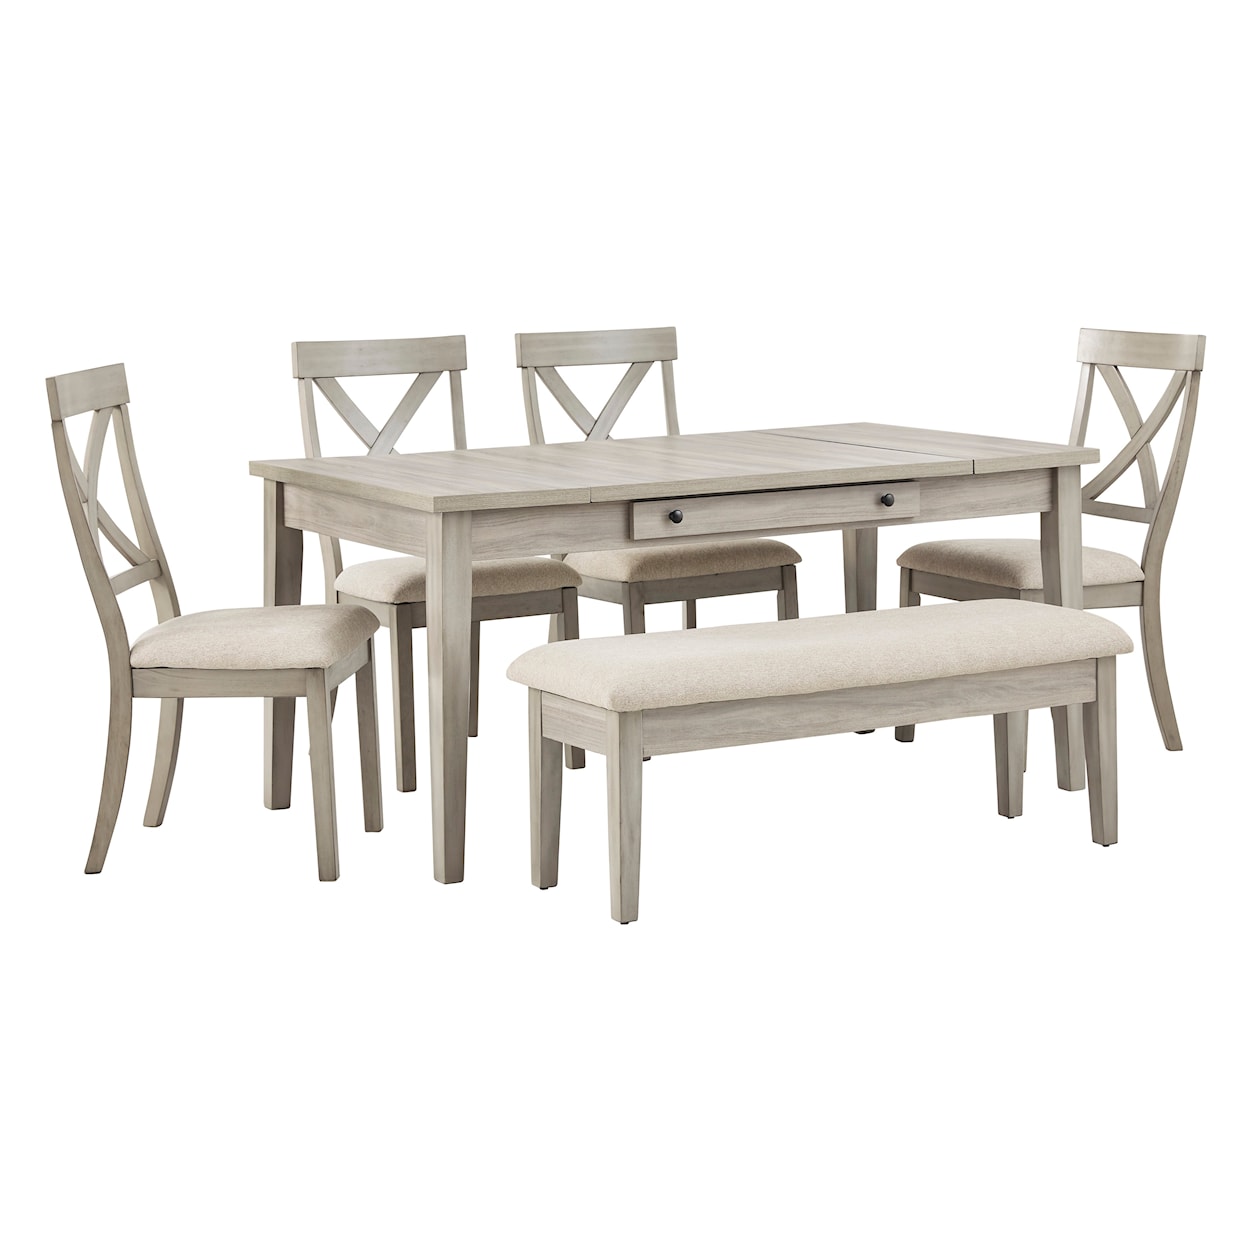 Michael Alan Select Parellen 6-Piece Table and Chair Set with Bench